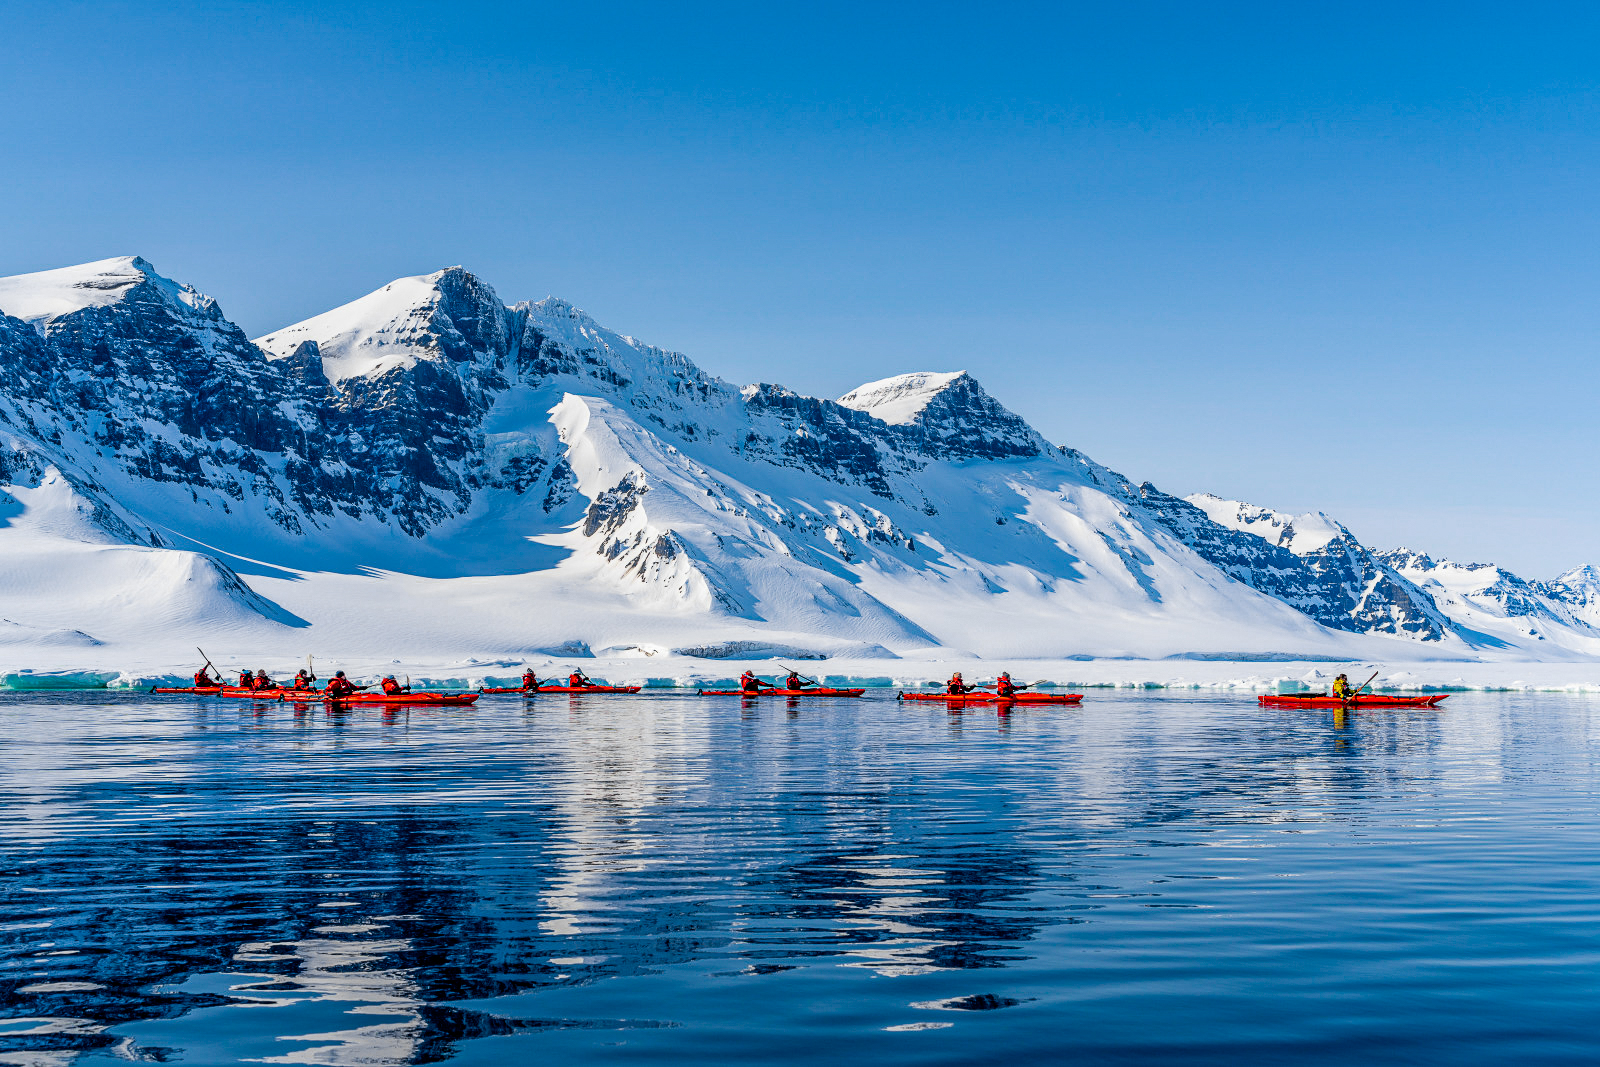 Kayaking in the Greenland Arctic from Ponant's Le Lyrial cruise ship